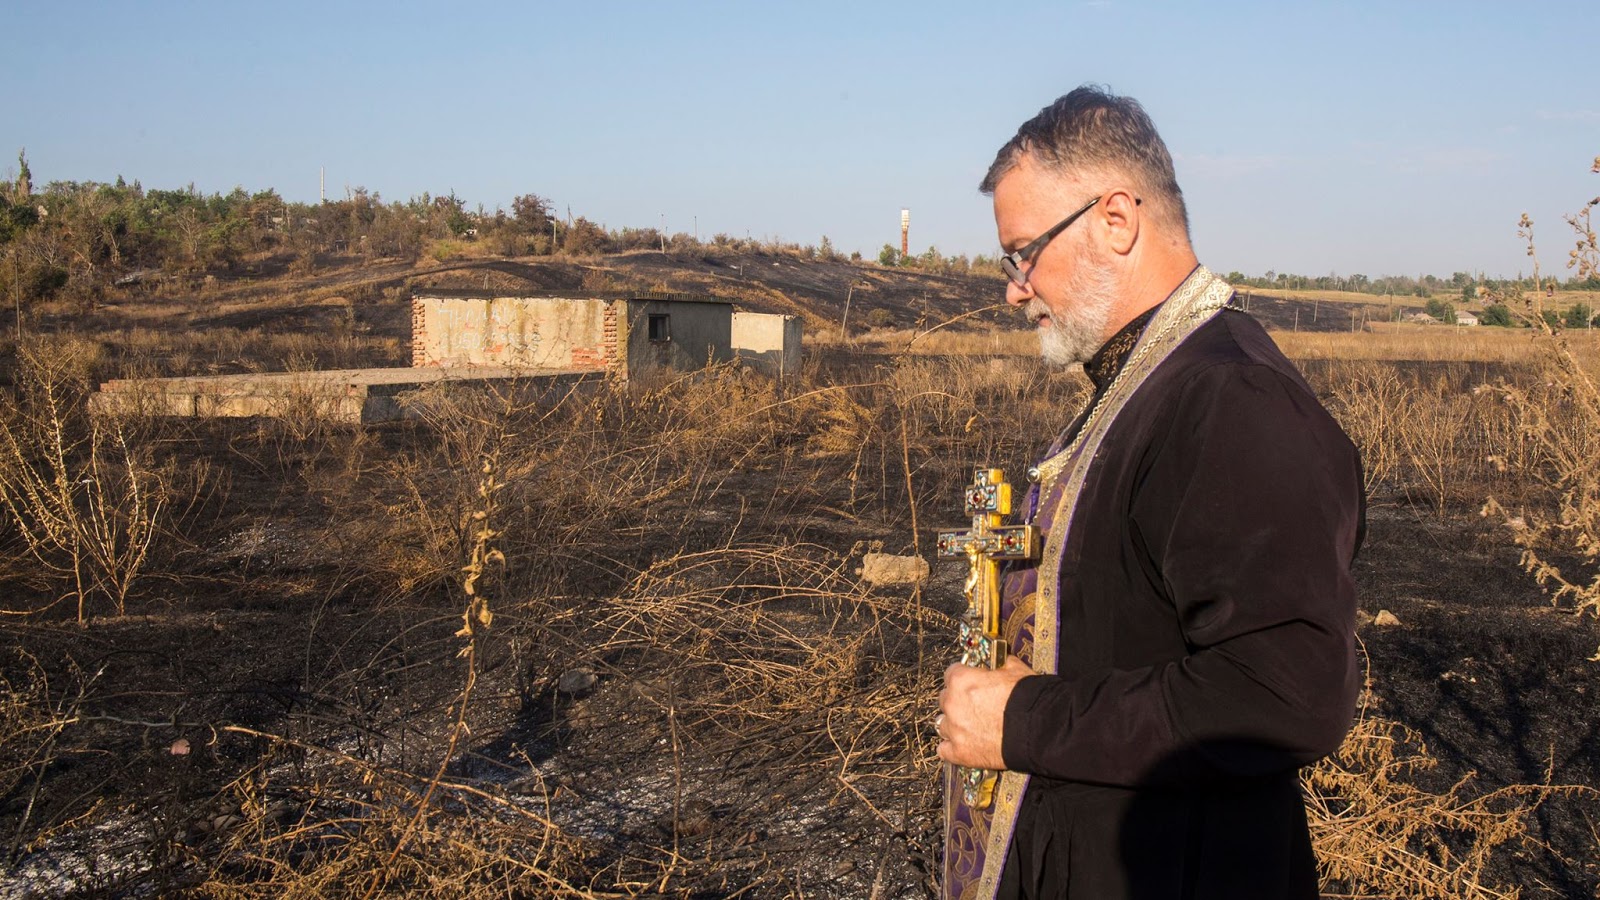 From Euromaidan to the prisons of Donbas: the tale of a Ukrainian military chaplain